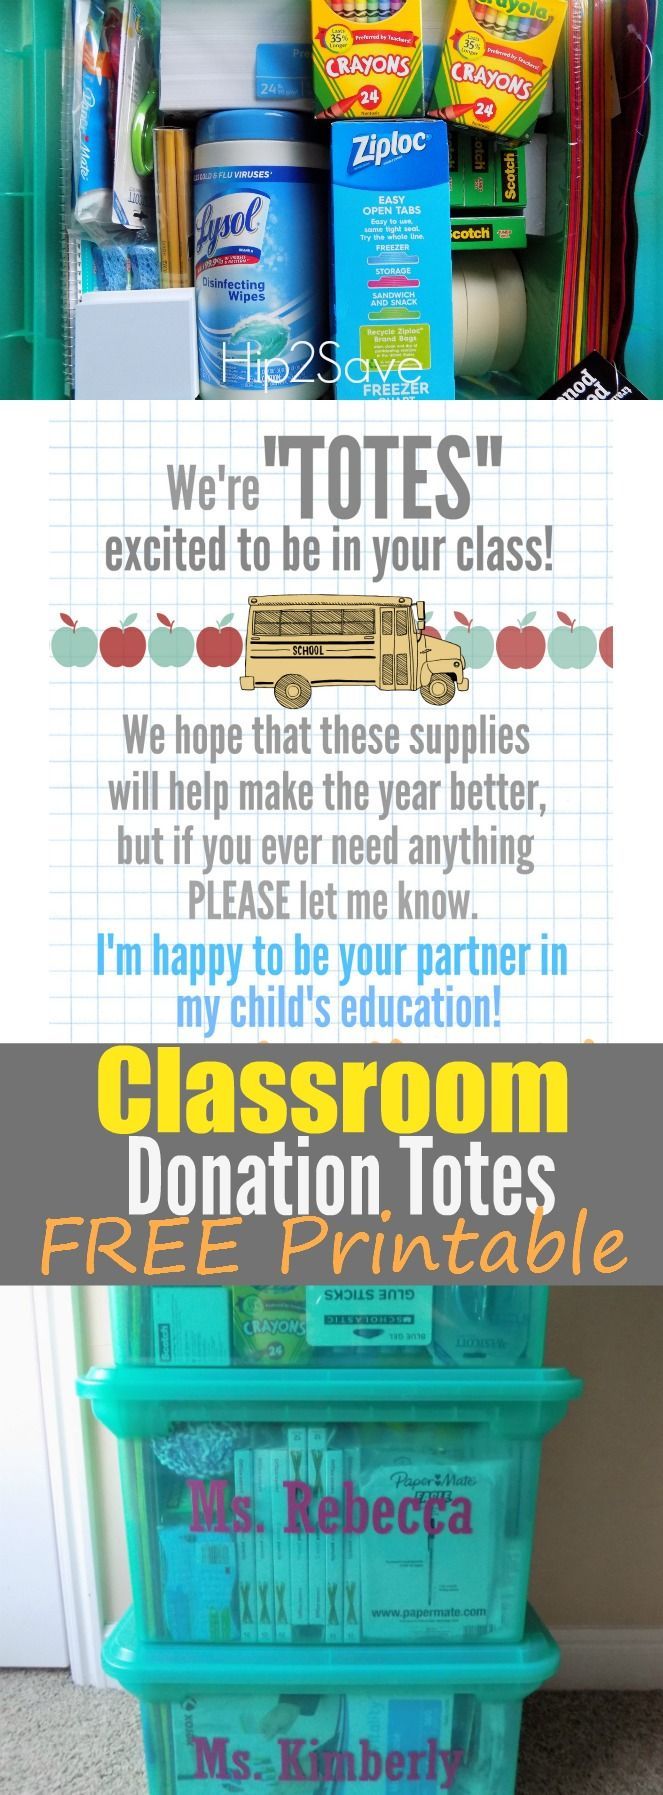 Classroom Donation Totes (Great Way to Give Back During the School Year) - Hip2Save -   18 DIY Clothes For School classroom ideas